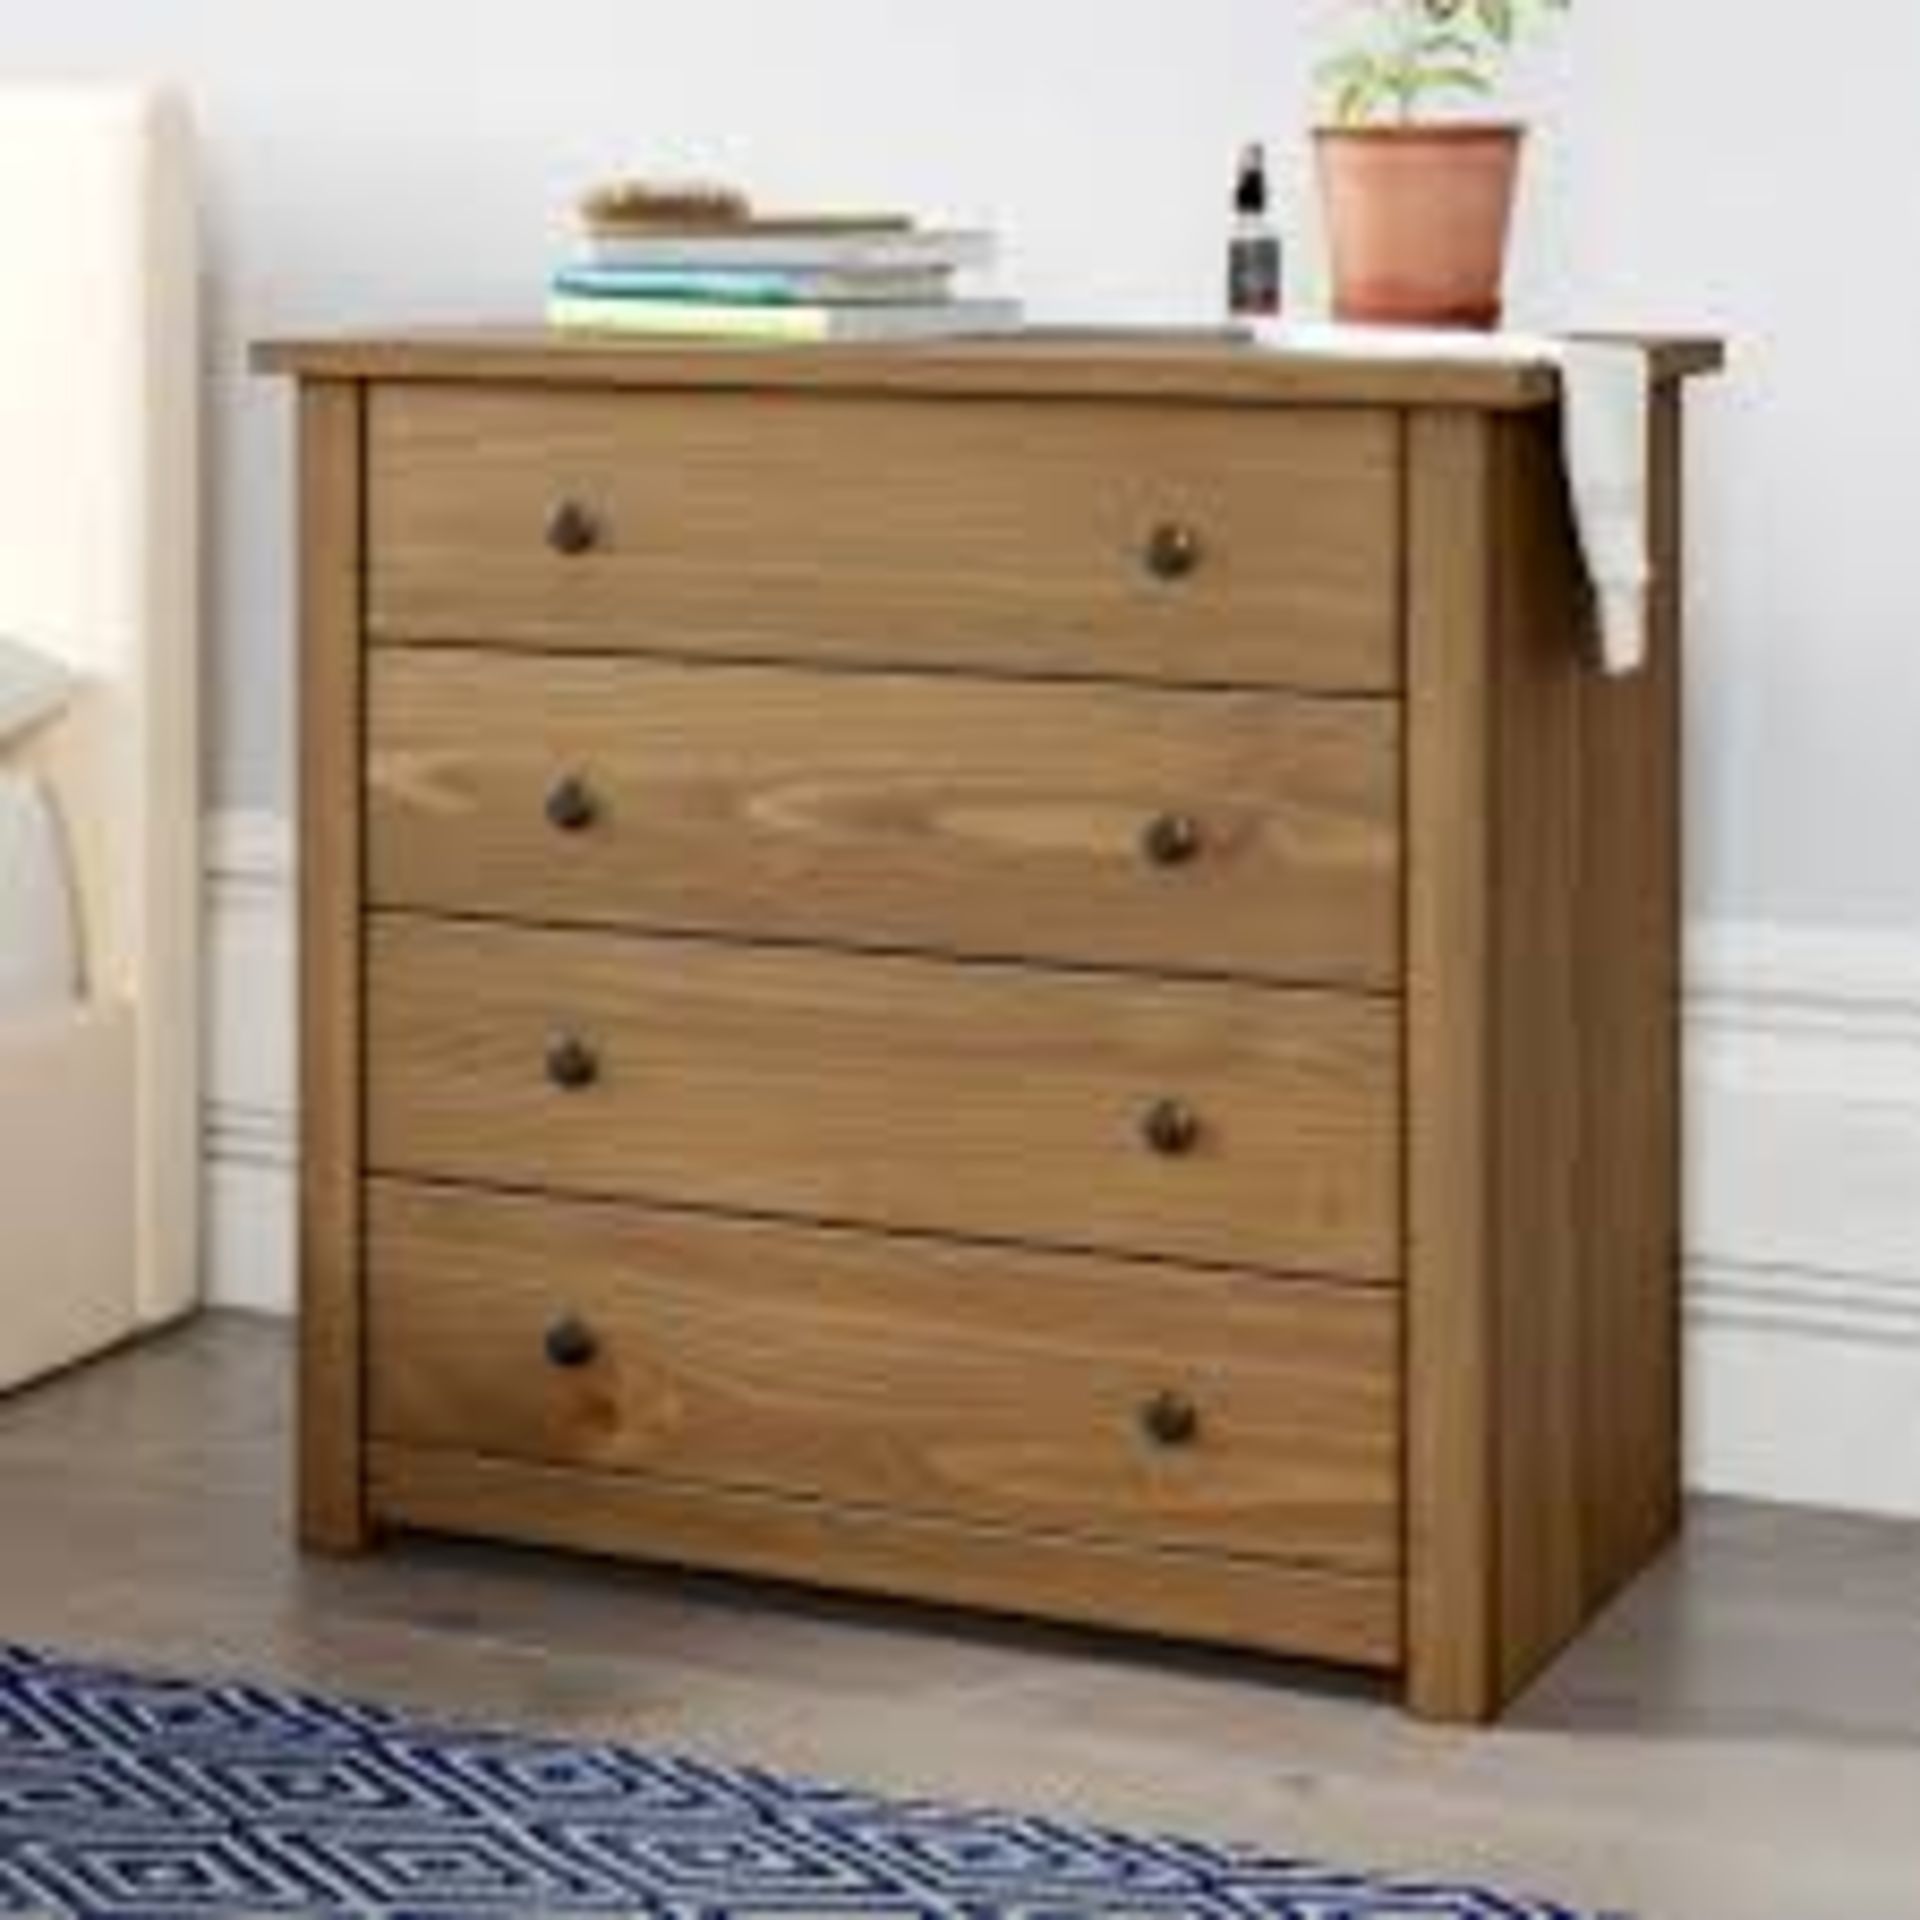 Boxed Birlea Santiago 4 Drawer Chest Of Draws In Waxed Pine RRP 110 (Public Viewing and Appraisals